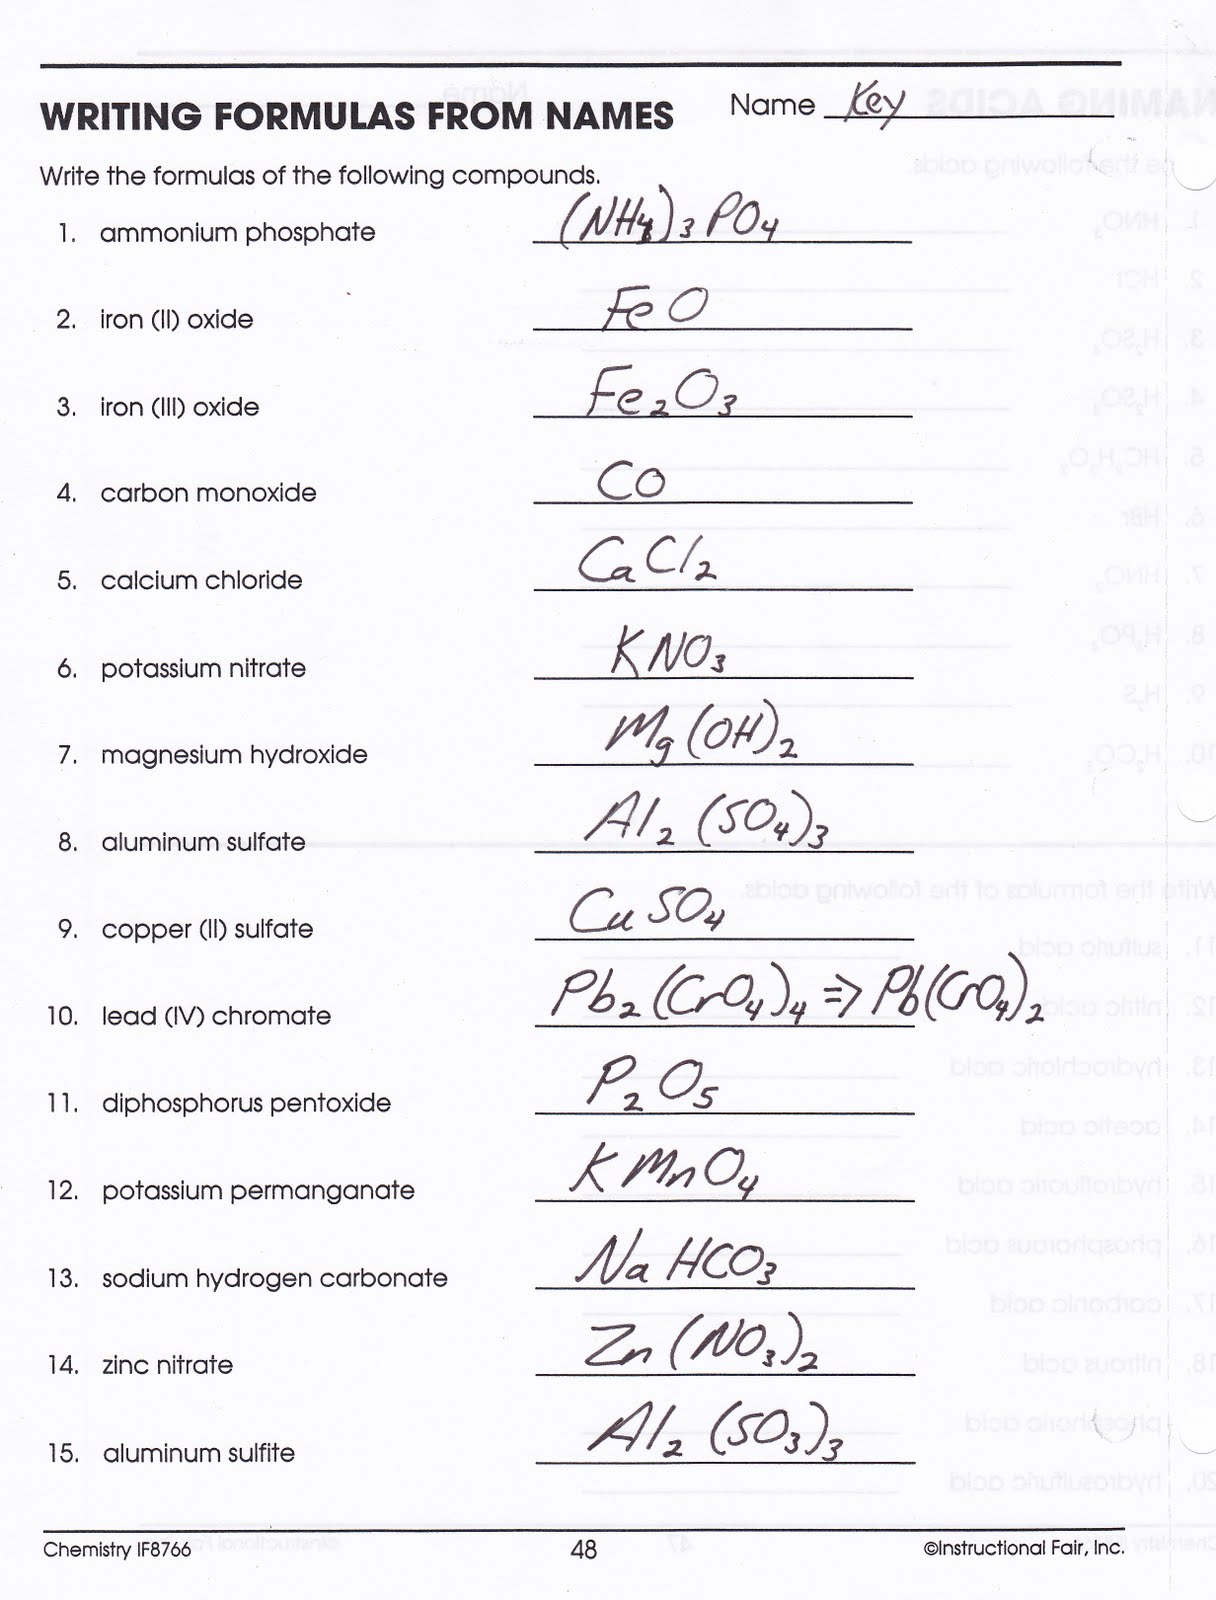 heritage-high-school-chemistry-2010-11-writing-compound-names-and